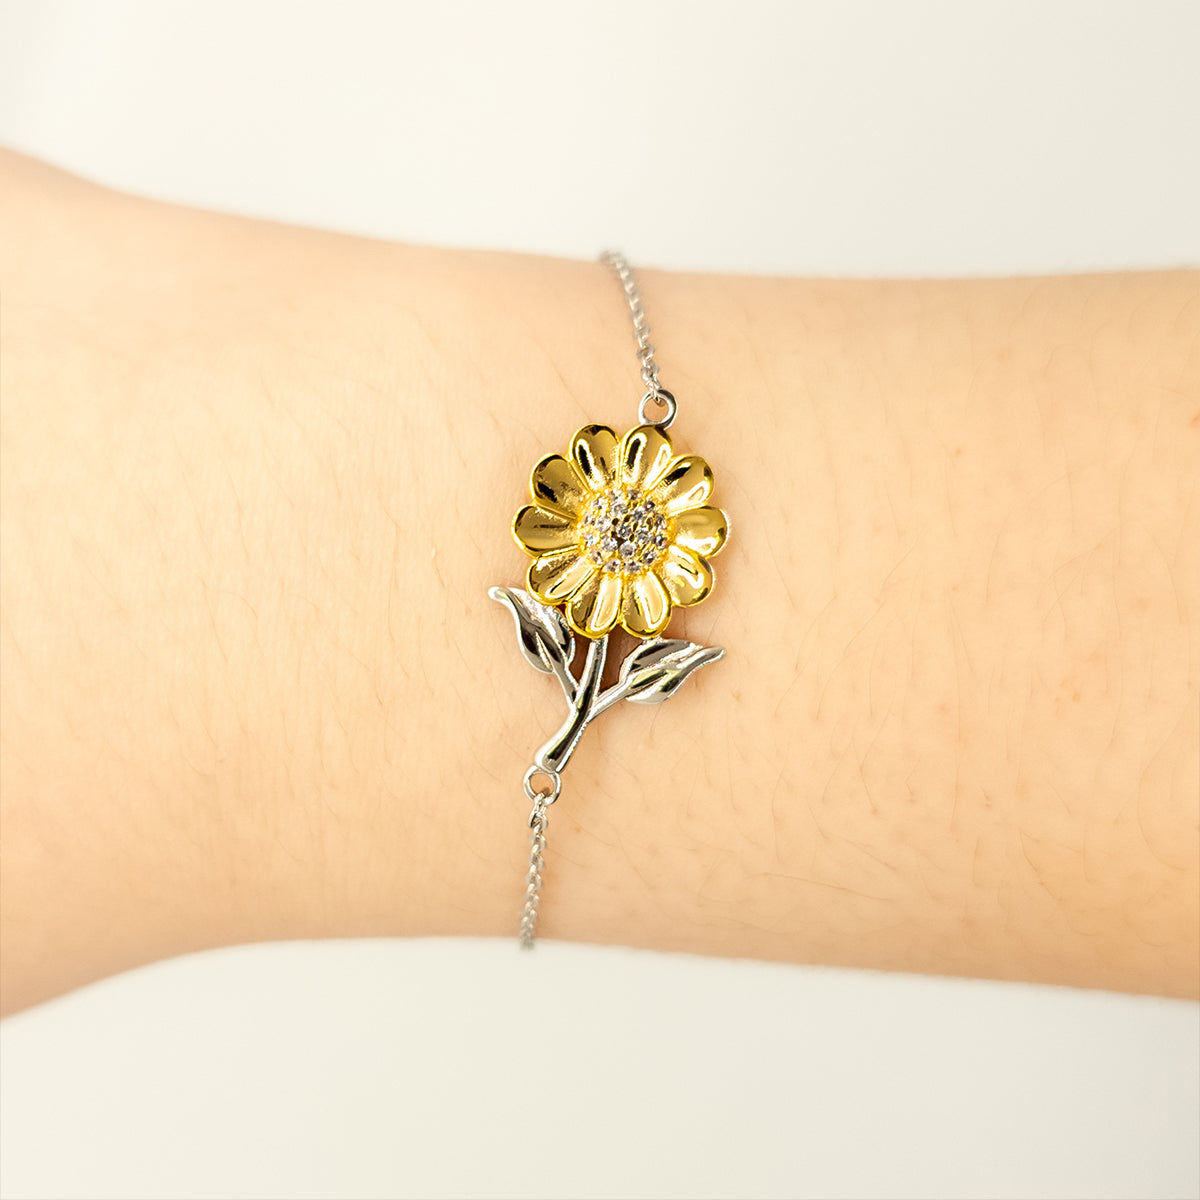 Husband Sunflower Bracelet You will always have a special place in my heart Inspirational Gift for Him on Birthday or Christmas